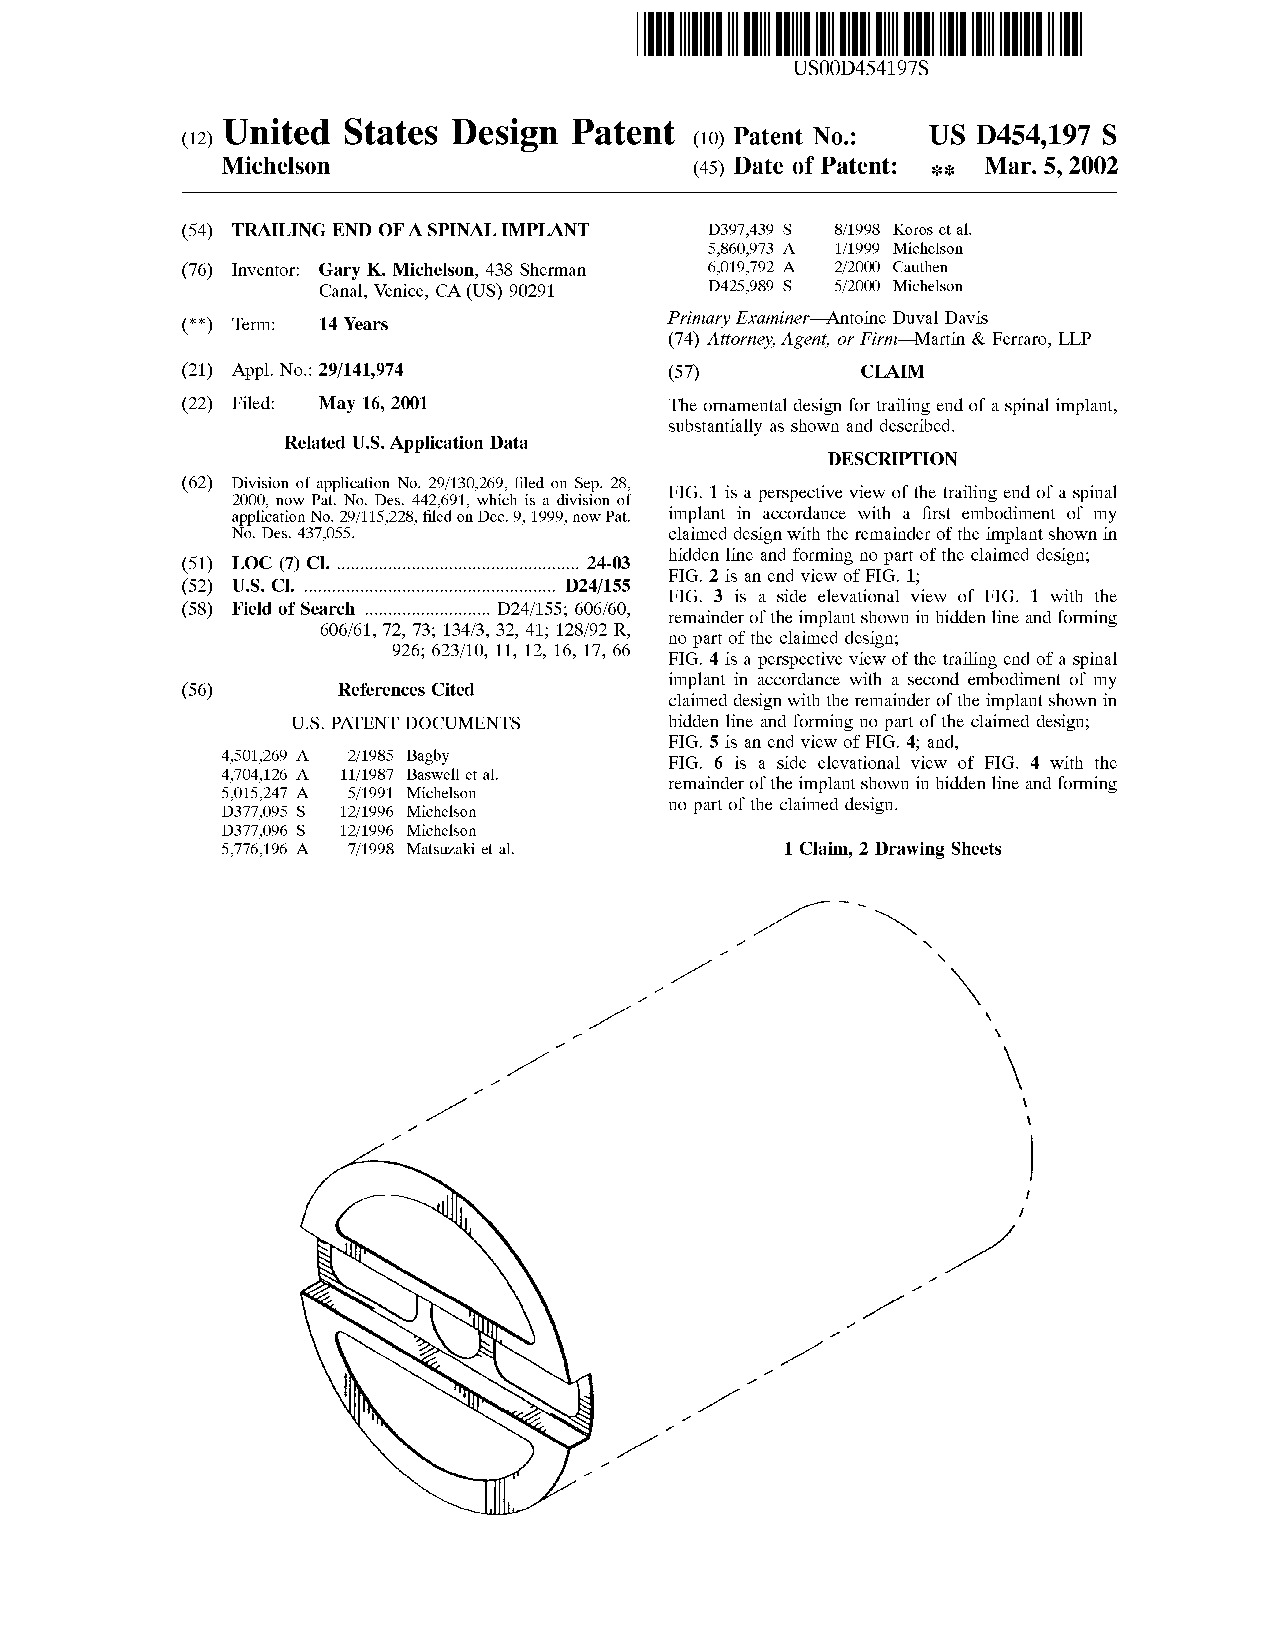 Trailing end of a spinal implant - Patent D454,197